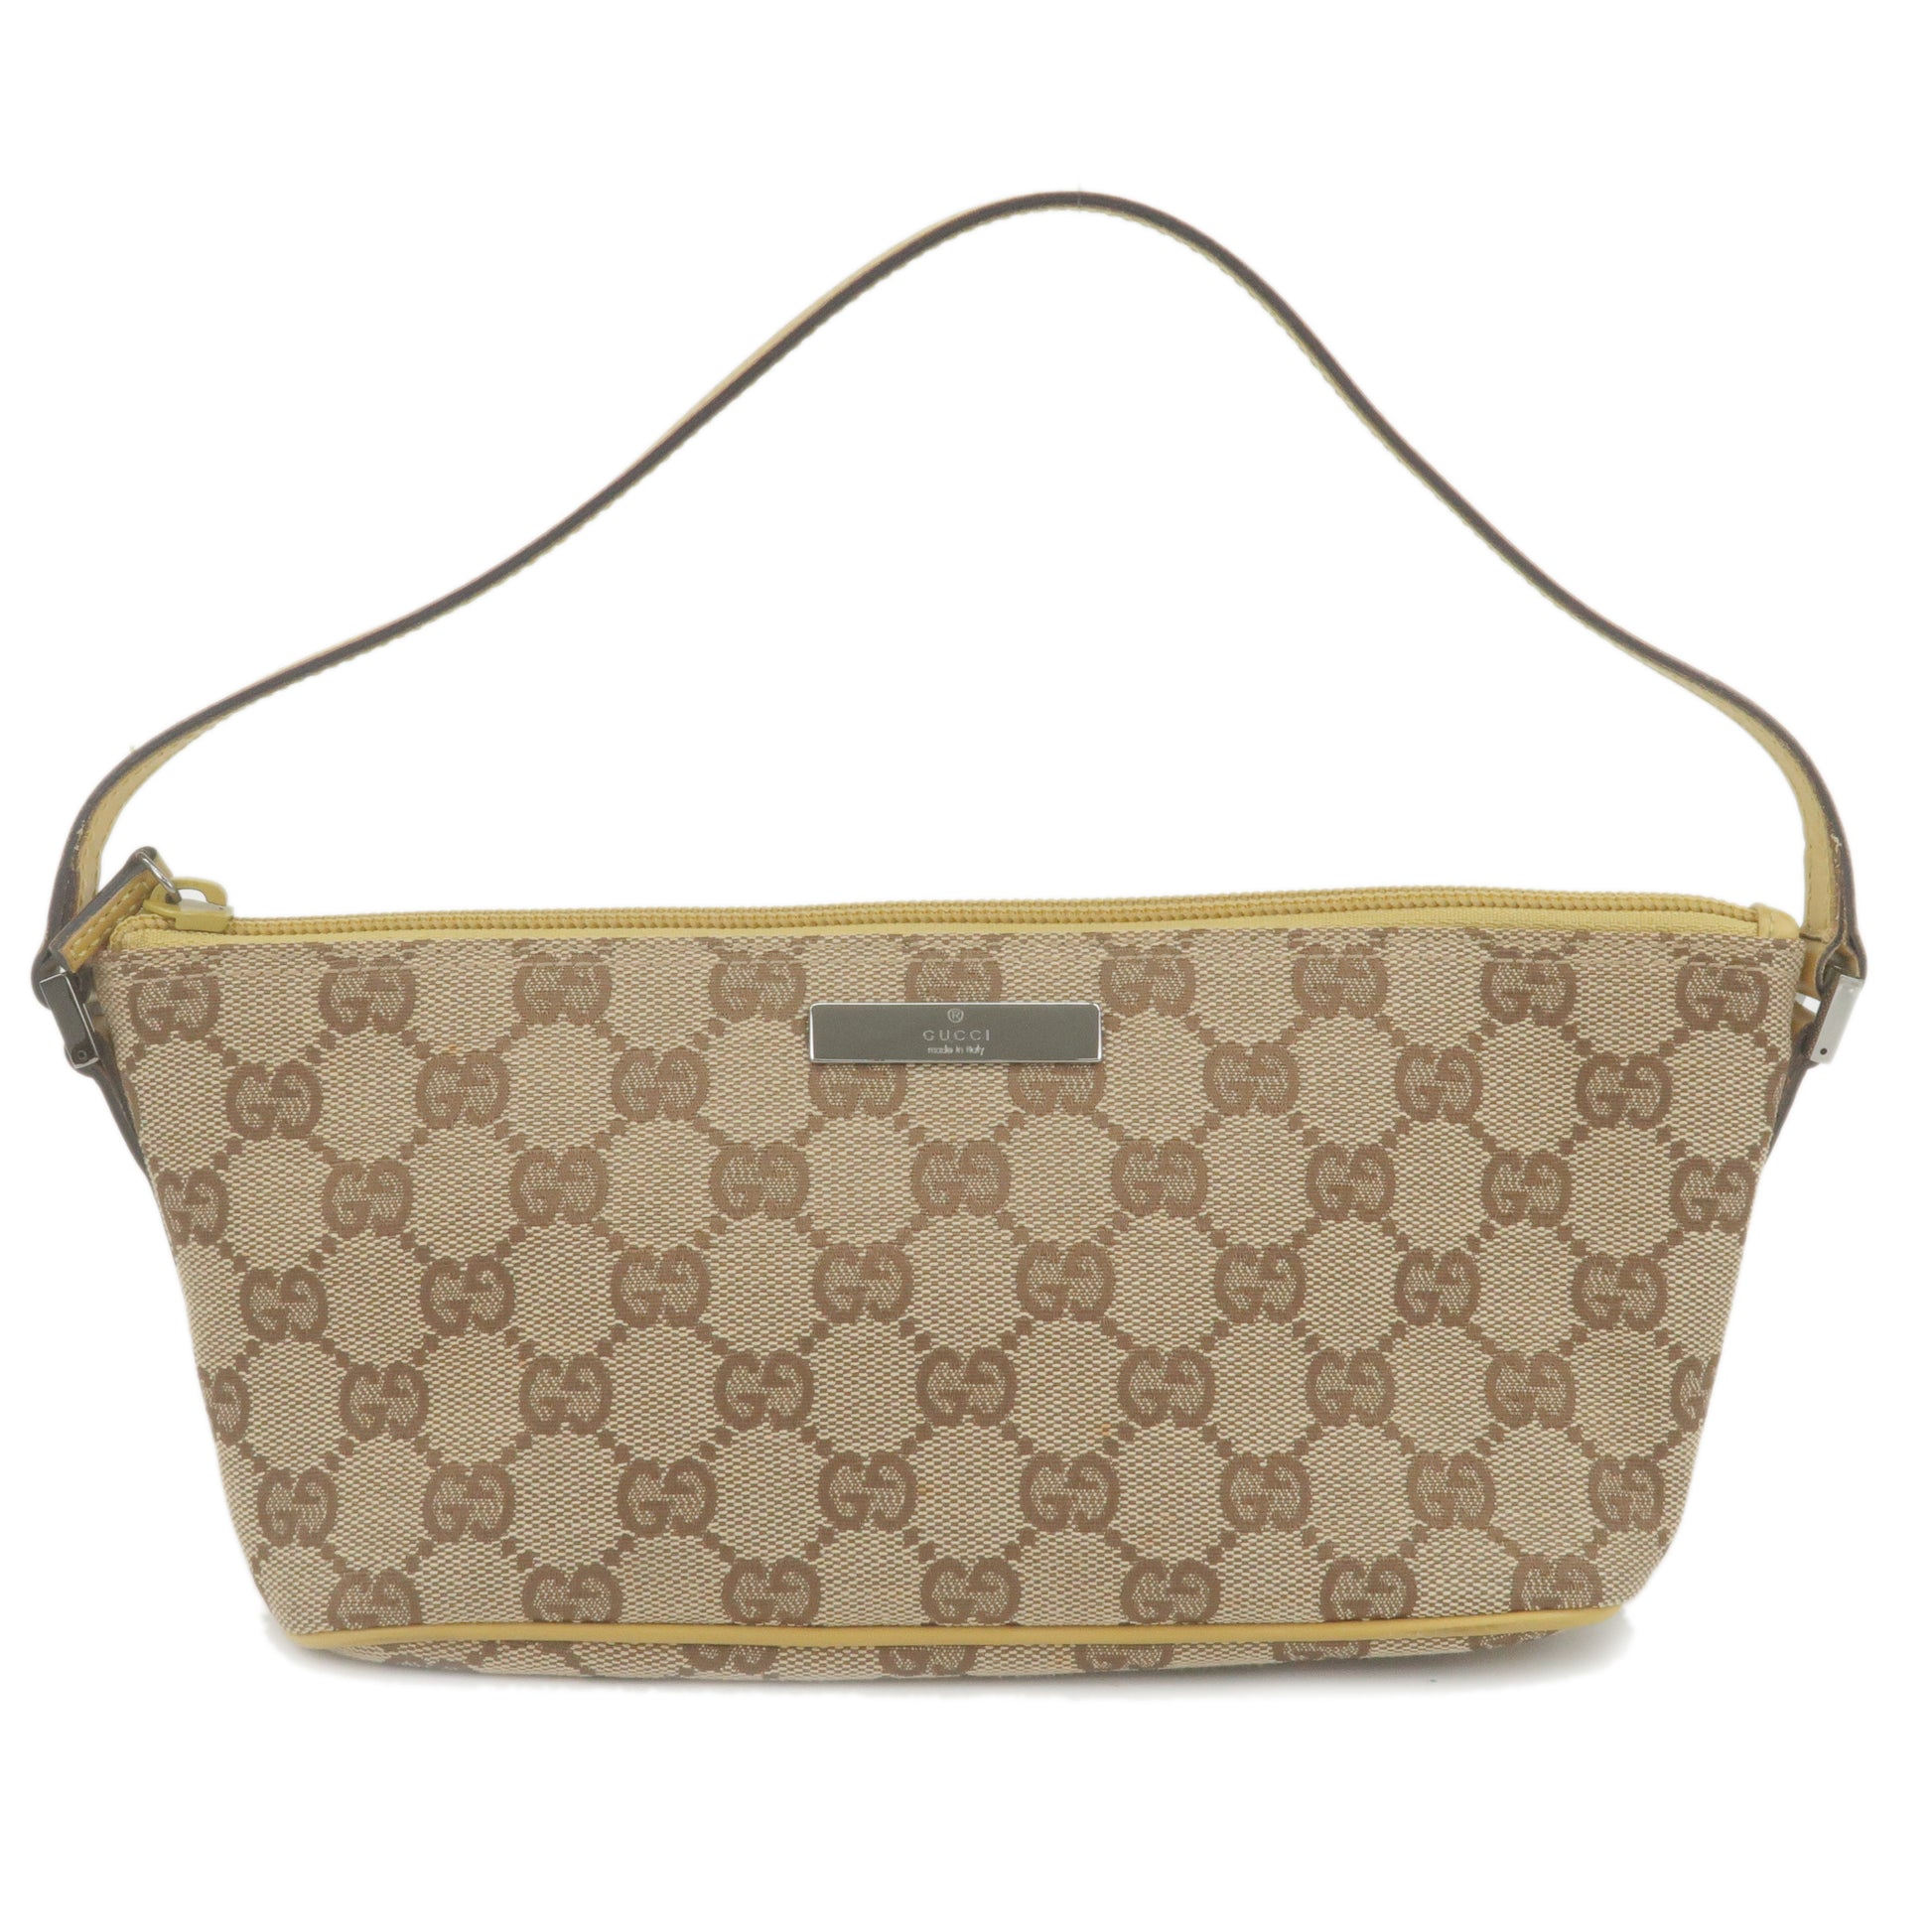 GUCCI-GG-Canvas-Leather-Pouch-Boat-Bag-Brown-Yellow-07198